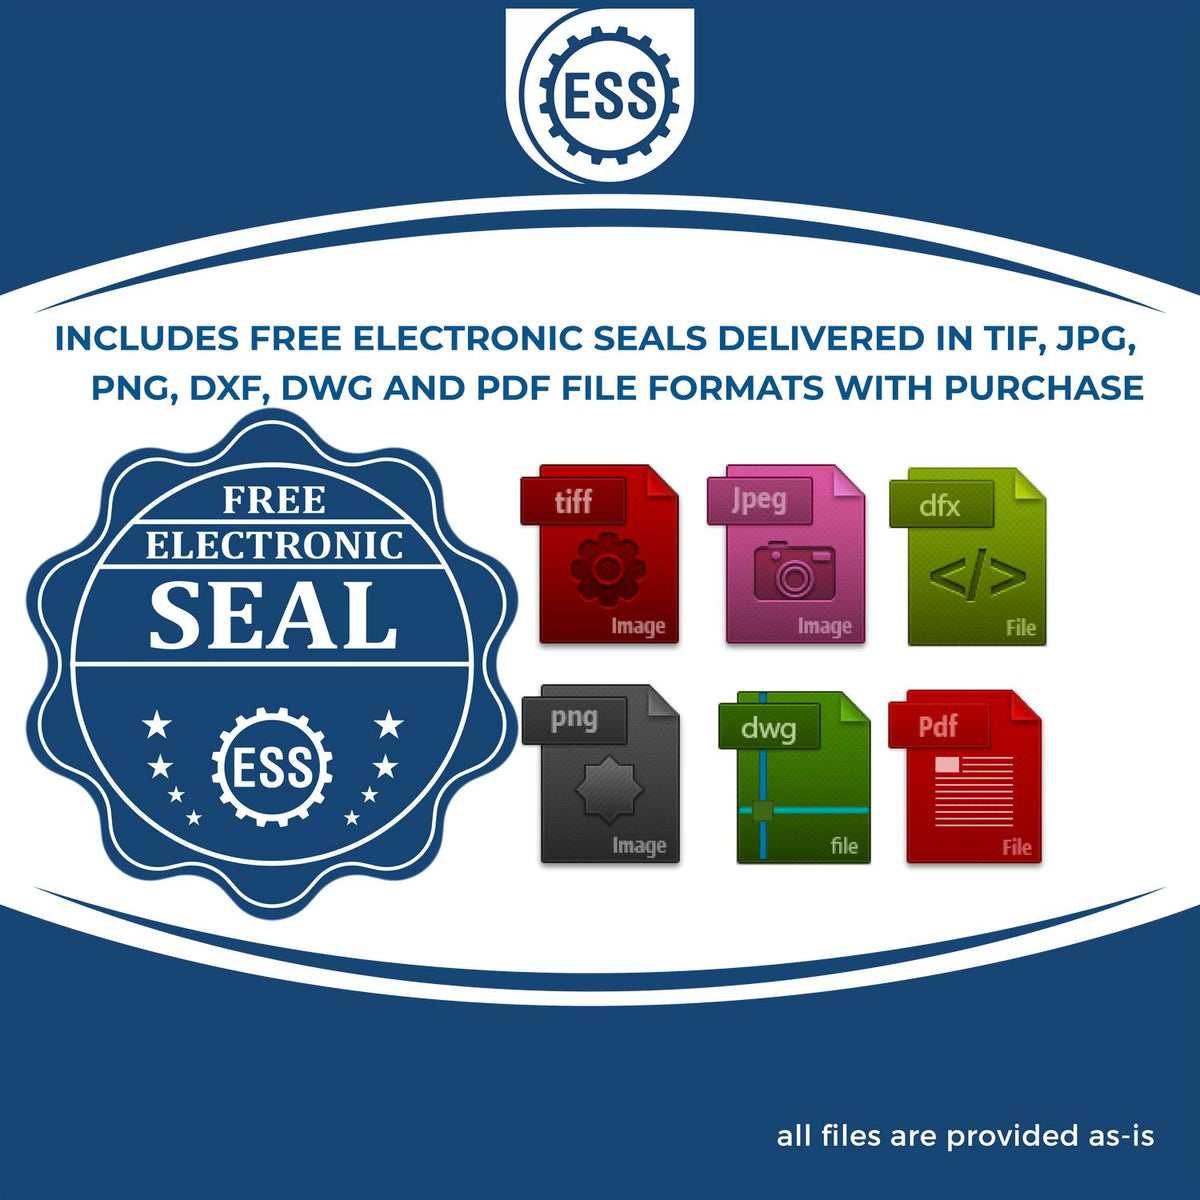 An infographic for the free electronic seal for the Self-Inking Illinois Landscape Architect Stamp illustrating the different file type icons such as DXF, DWG, TIF, JPG and PNG.